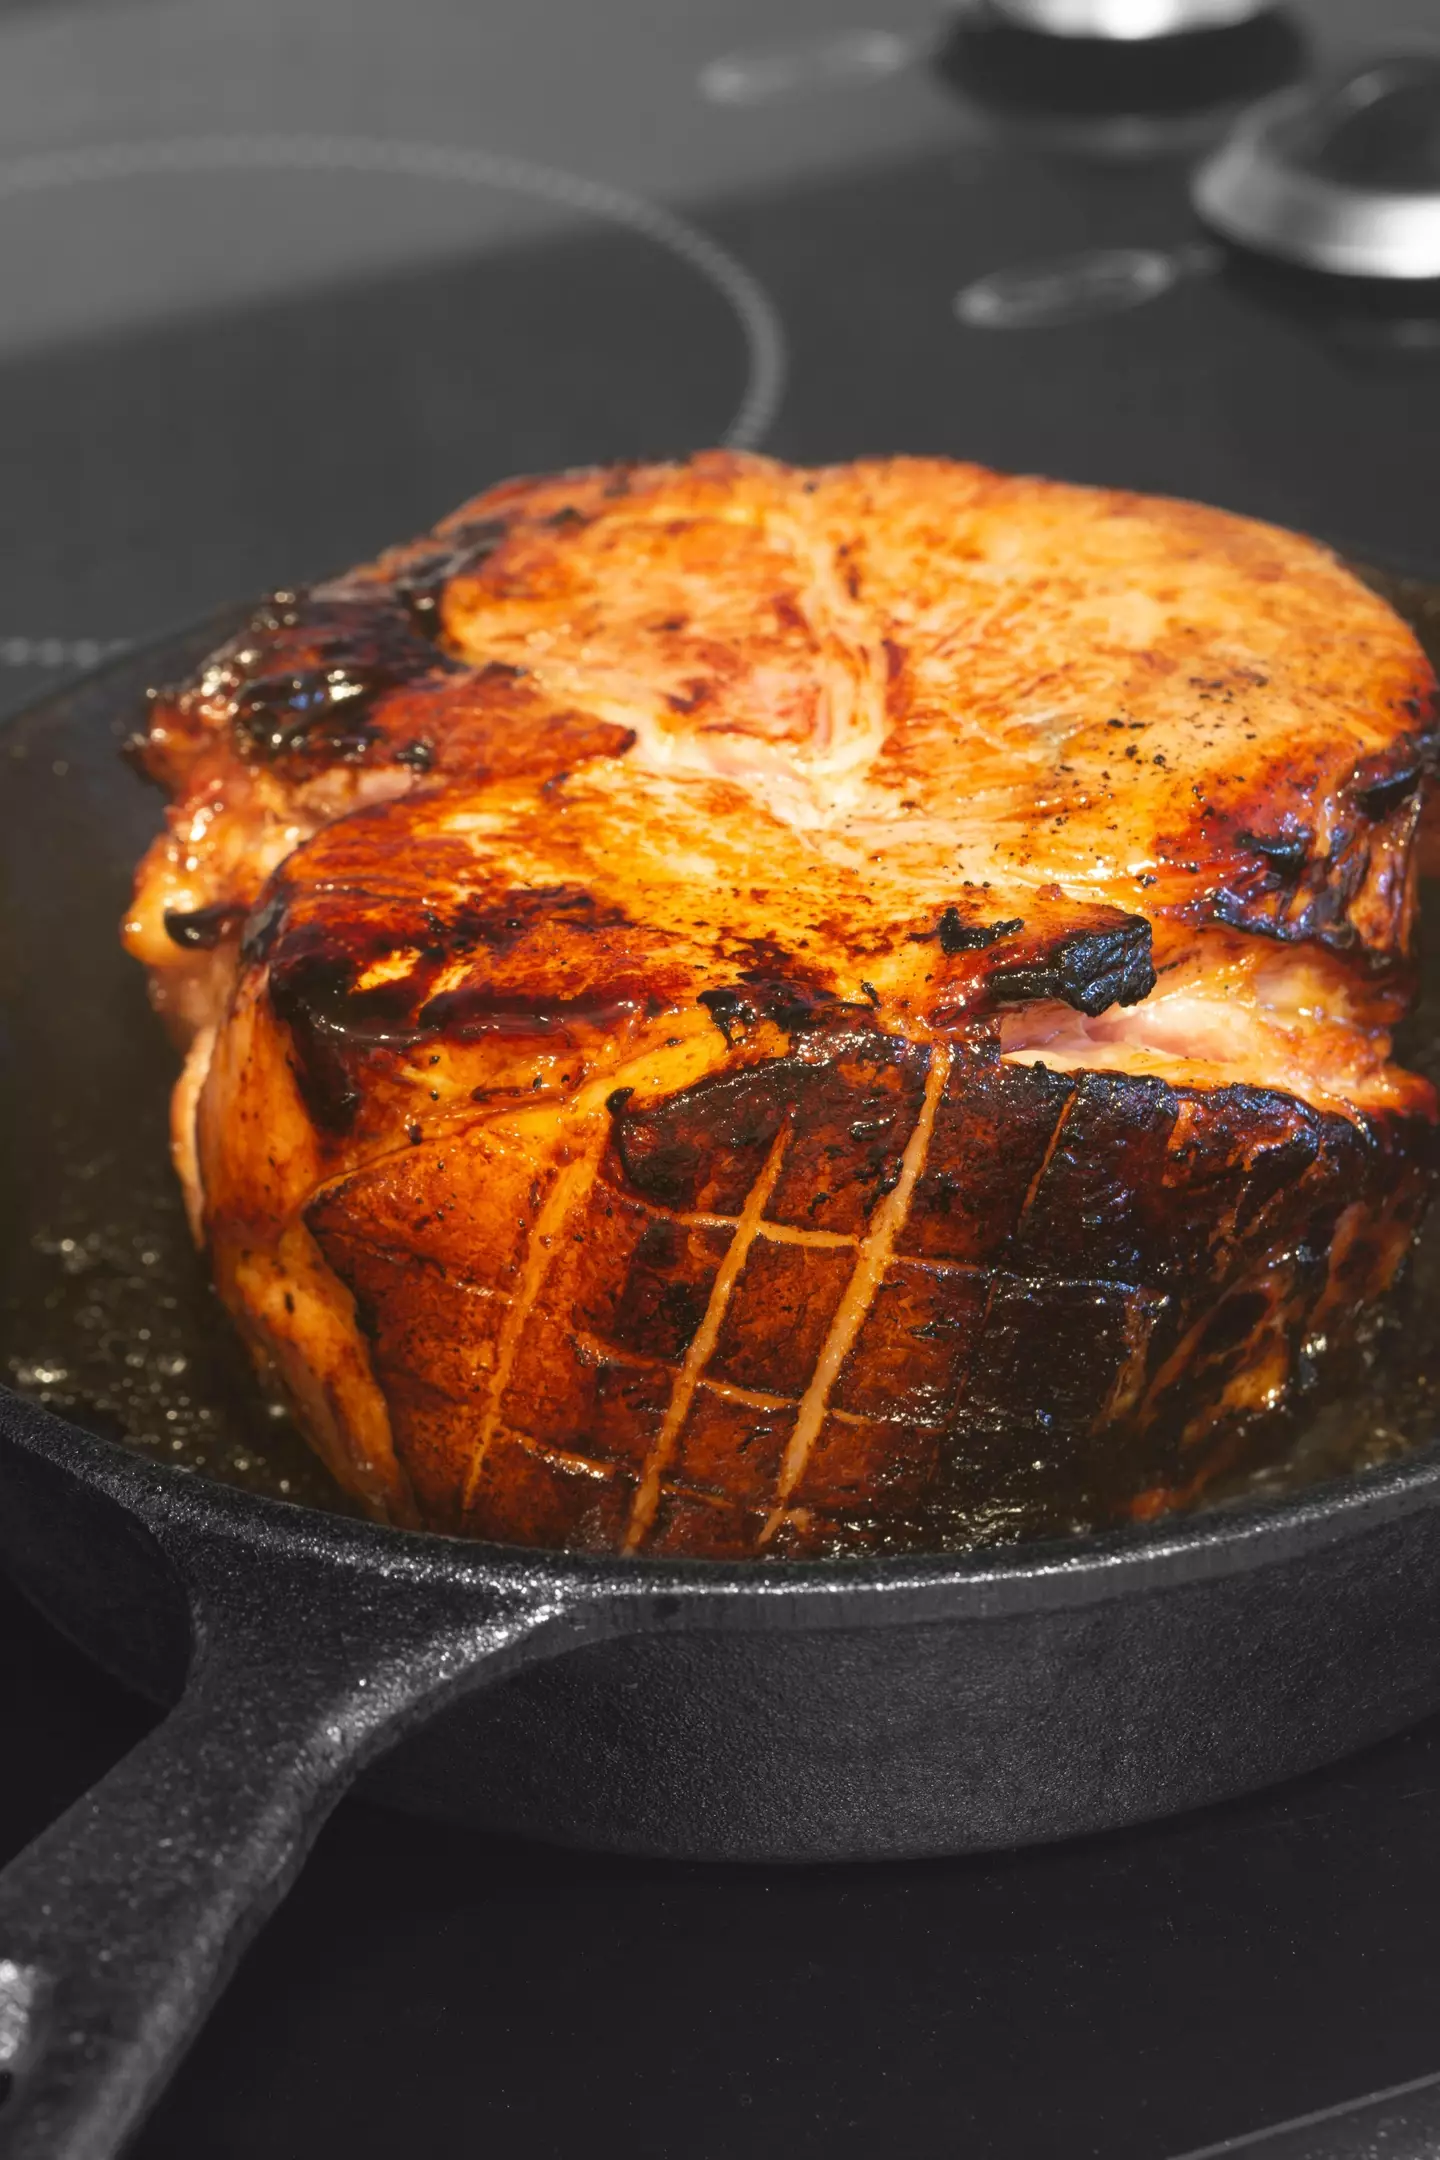 The woman had accidentally bought gammon (